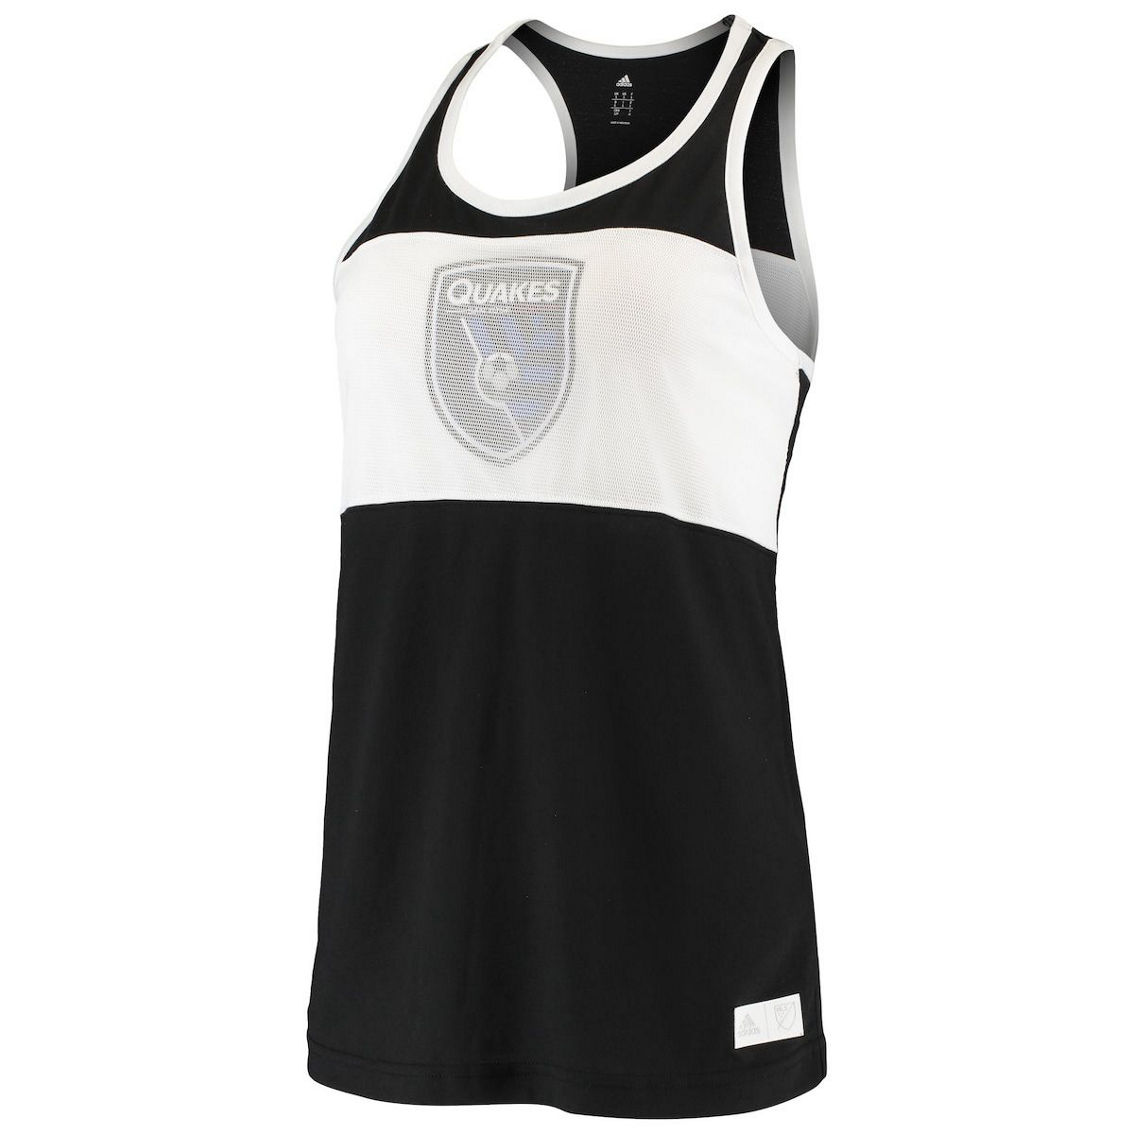 adidas Women's Black San Jose Earthquakes Finished Tank Top - Image 3 of 4